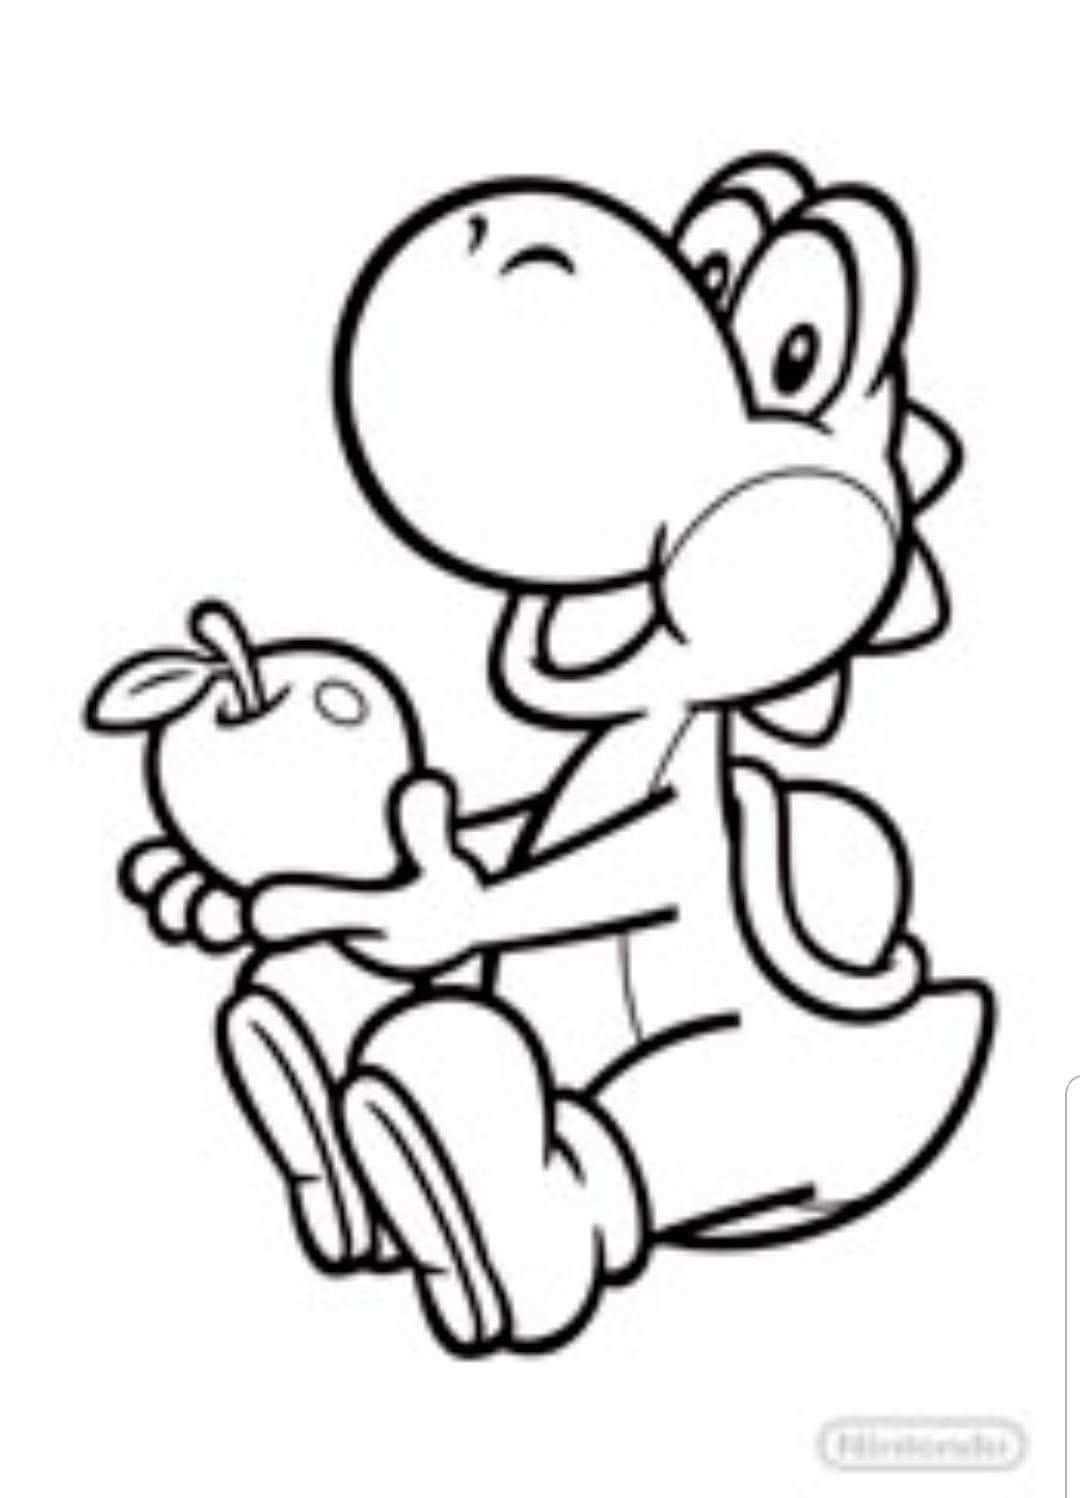 Pin By Erica Echevarria On Mario Super Mario Coloring Pages